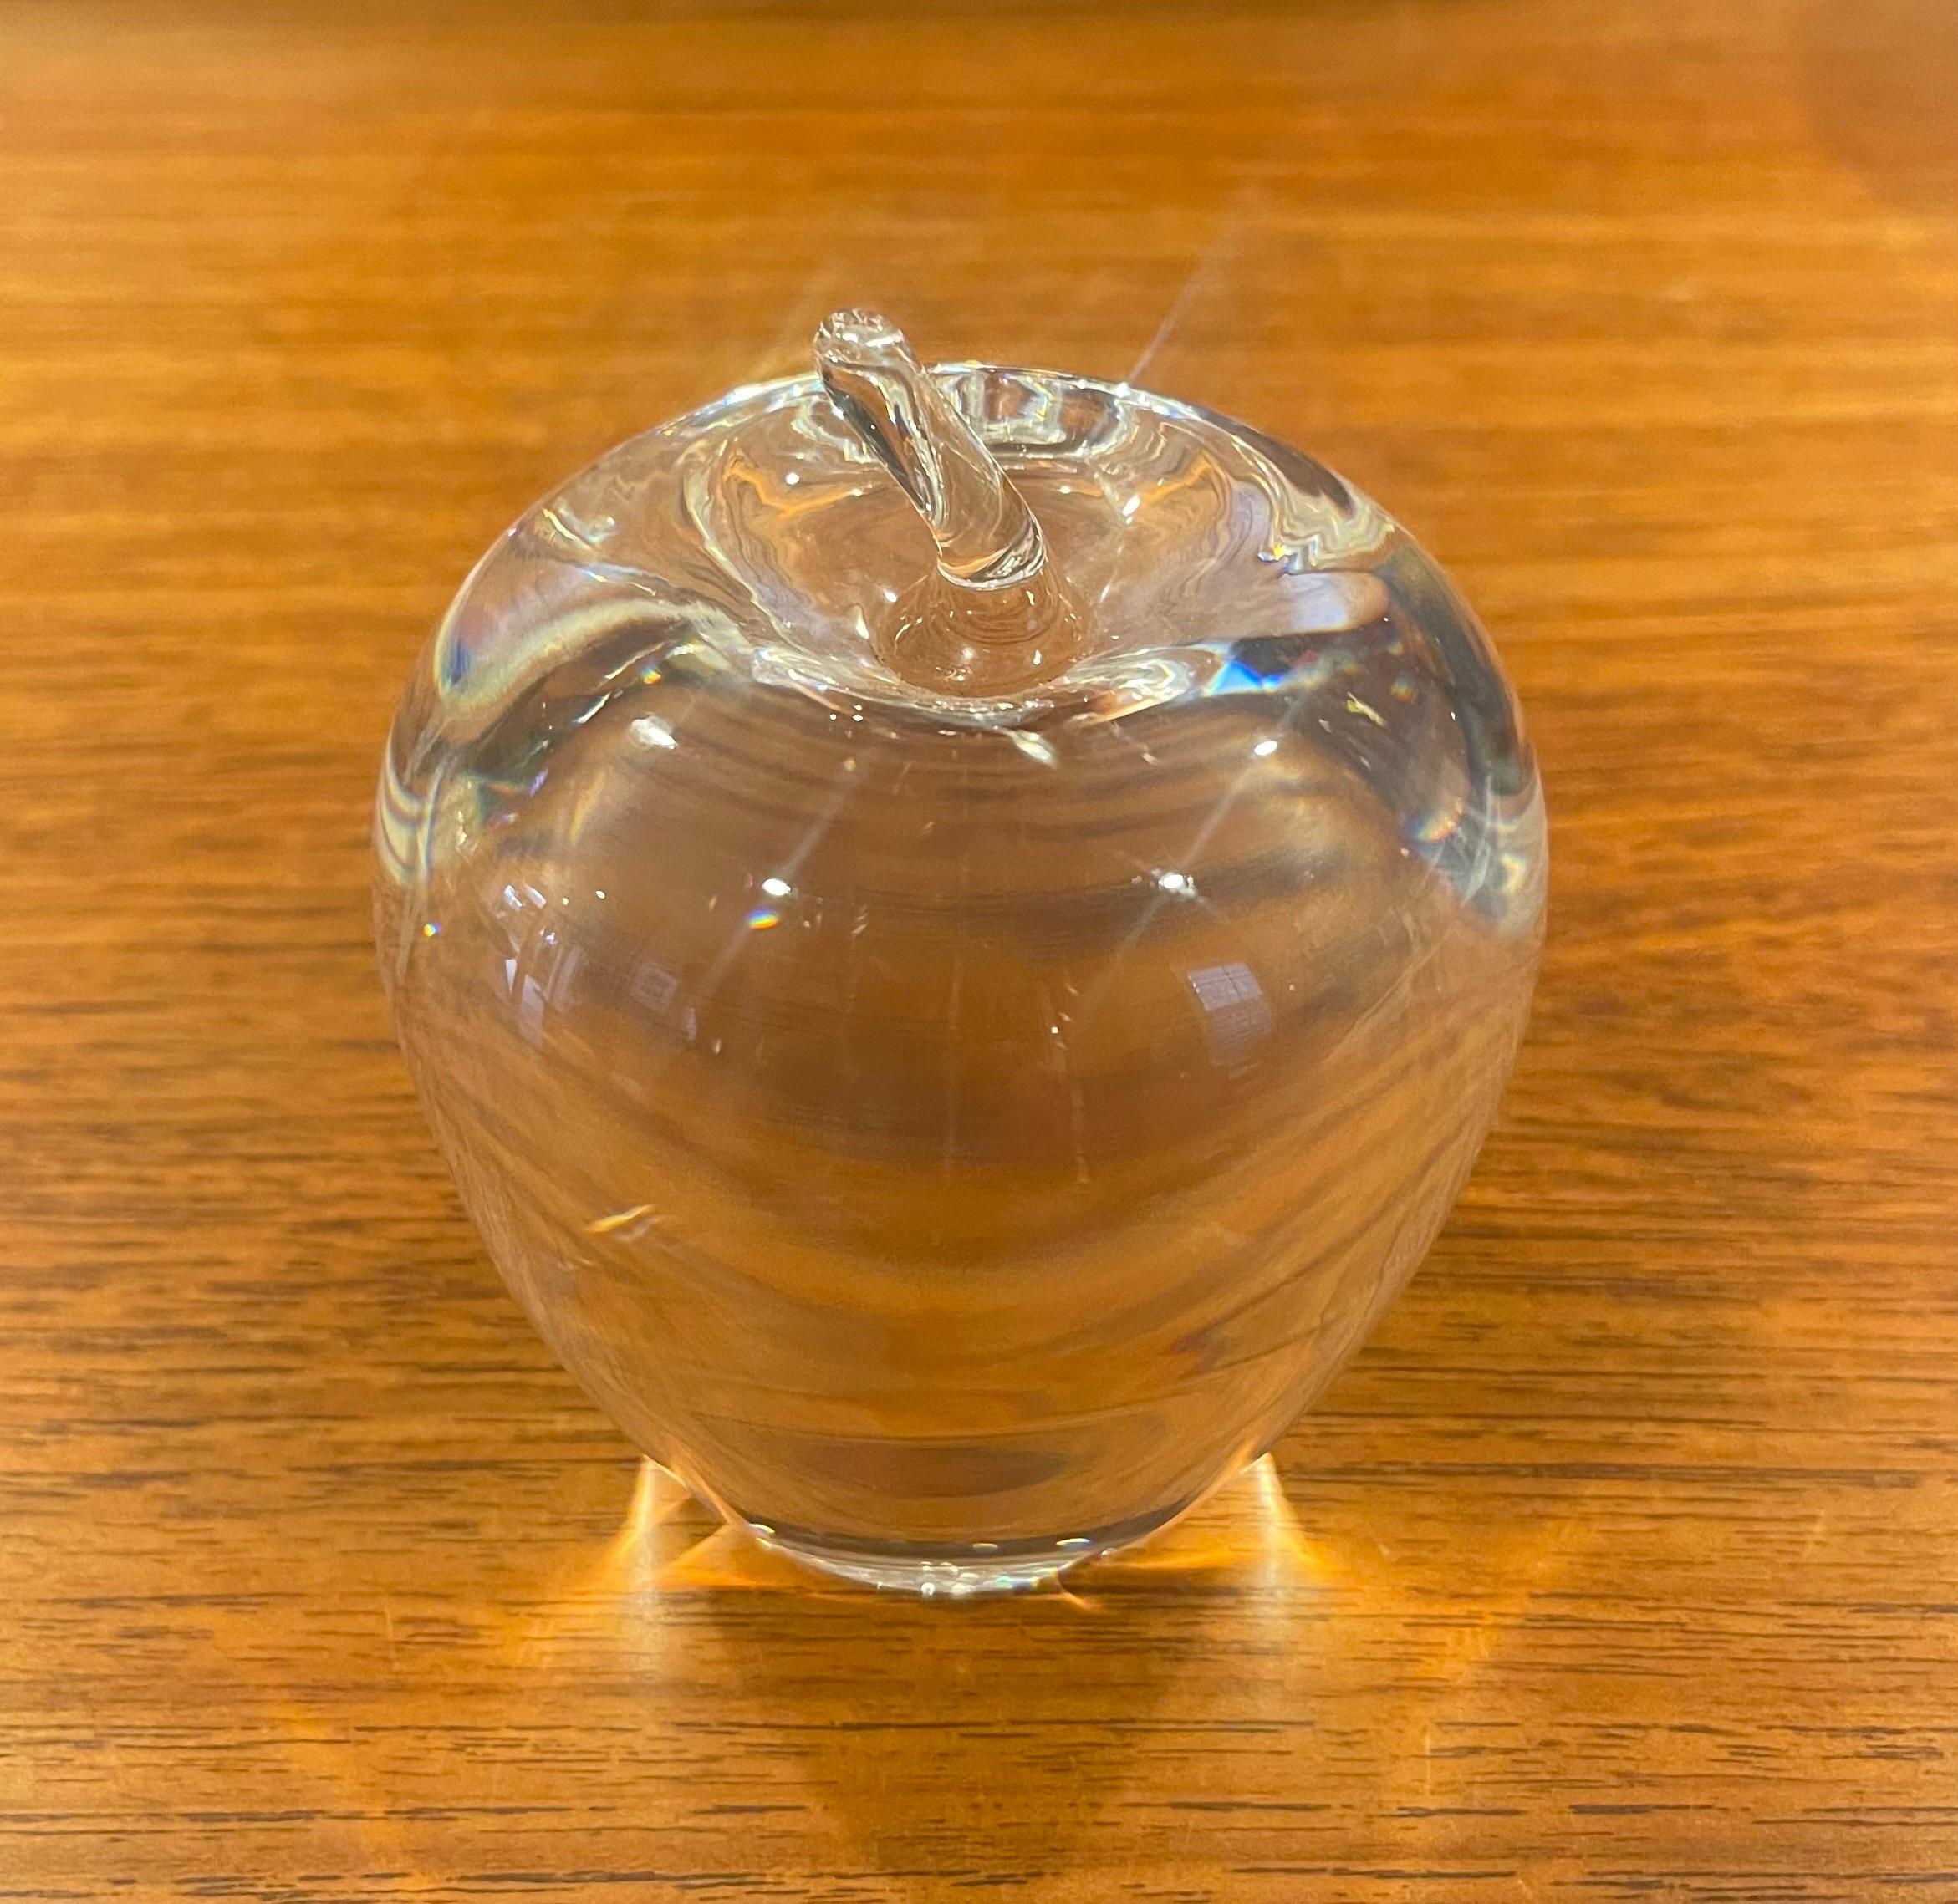 20th Century Crystal Apple Sculpture / Paper Weight by Steuben Glassworks